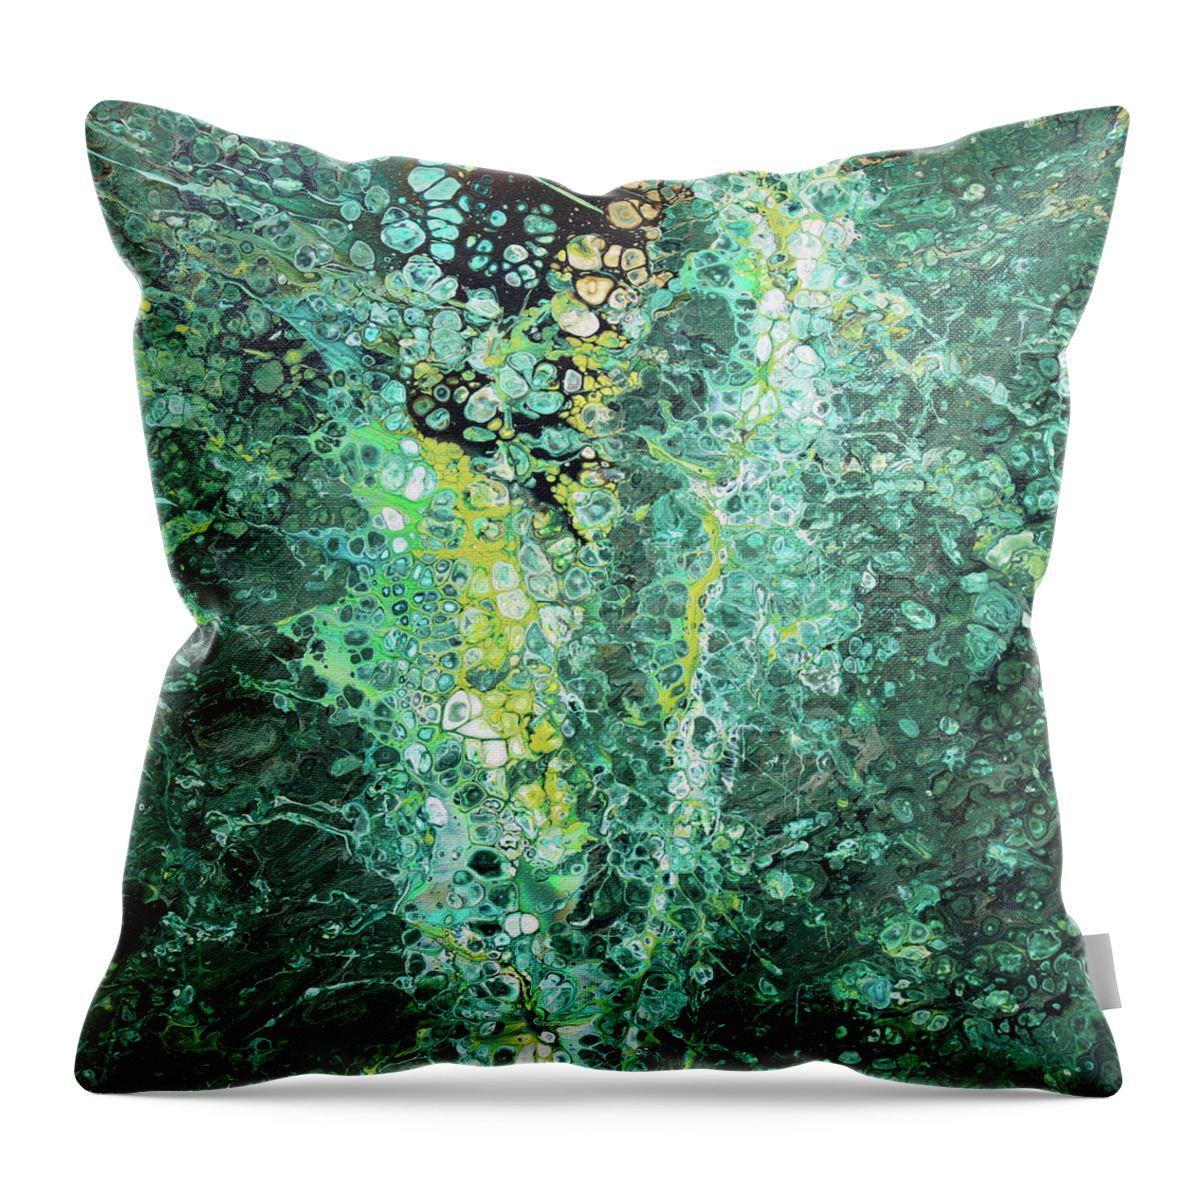  Throw Pillow featuring the painting Disassociate From Anima by Embrace The Matrix